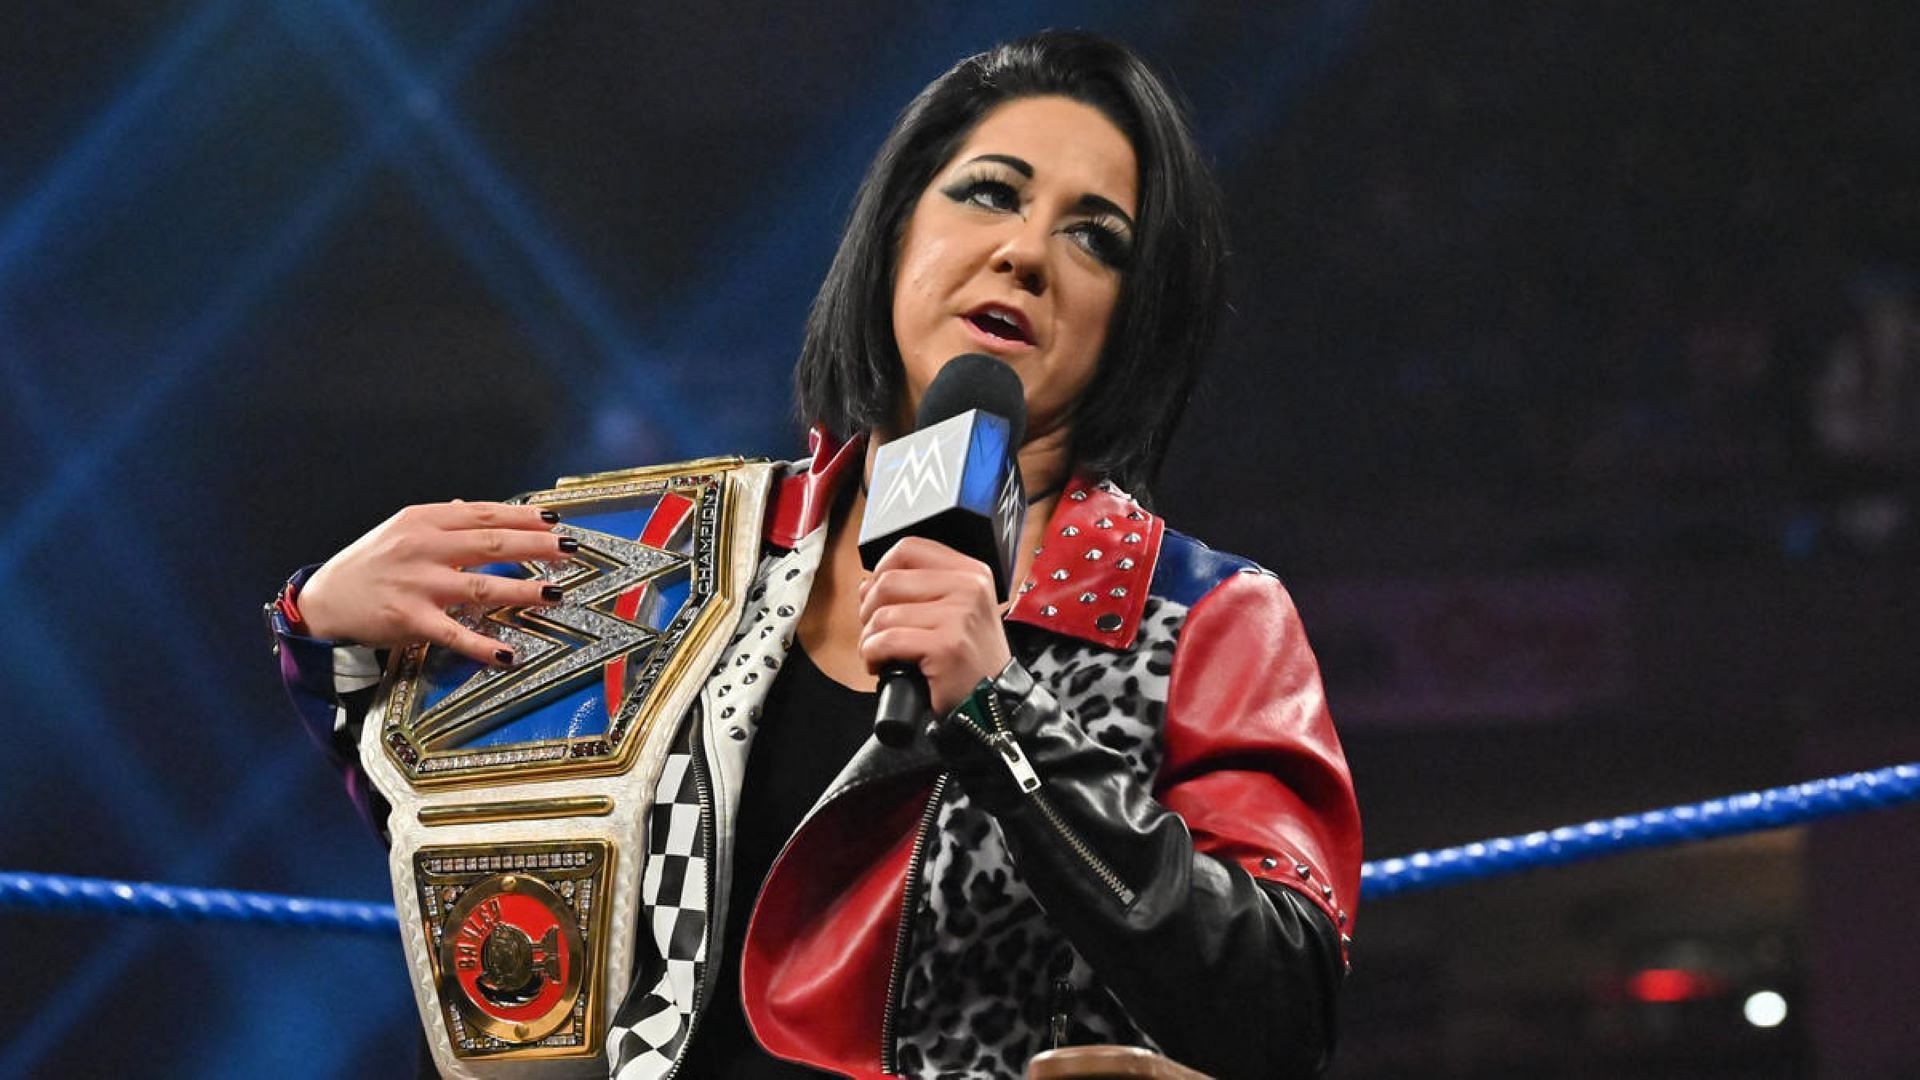 Bayley&#039;s last singles title was the SmackDown Women&#039;s Championship